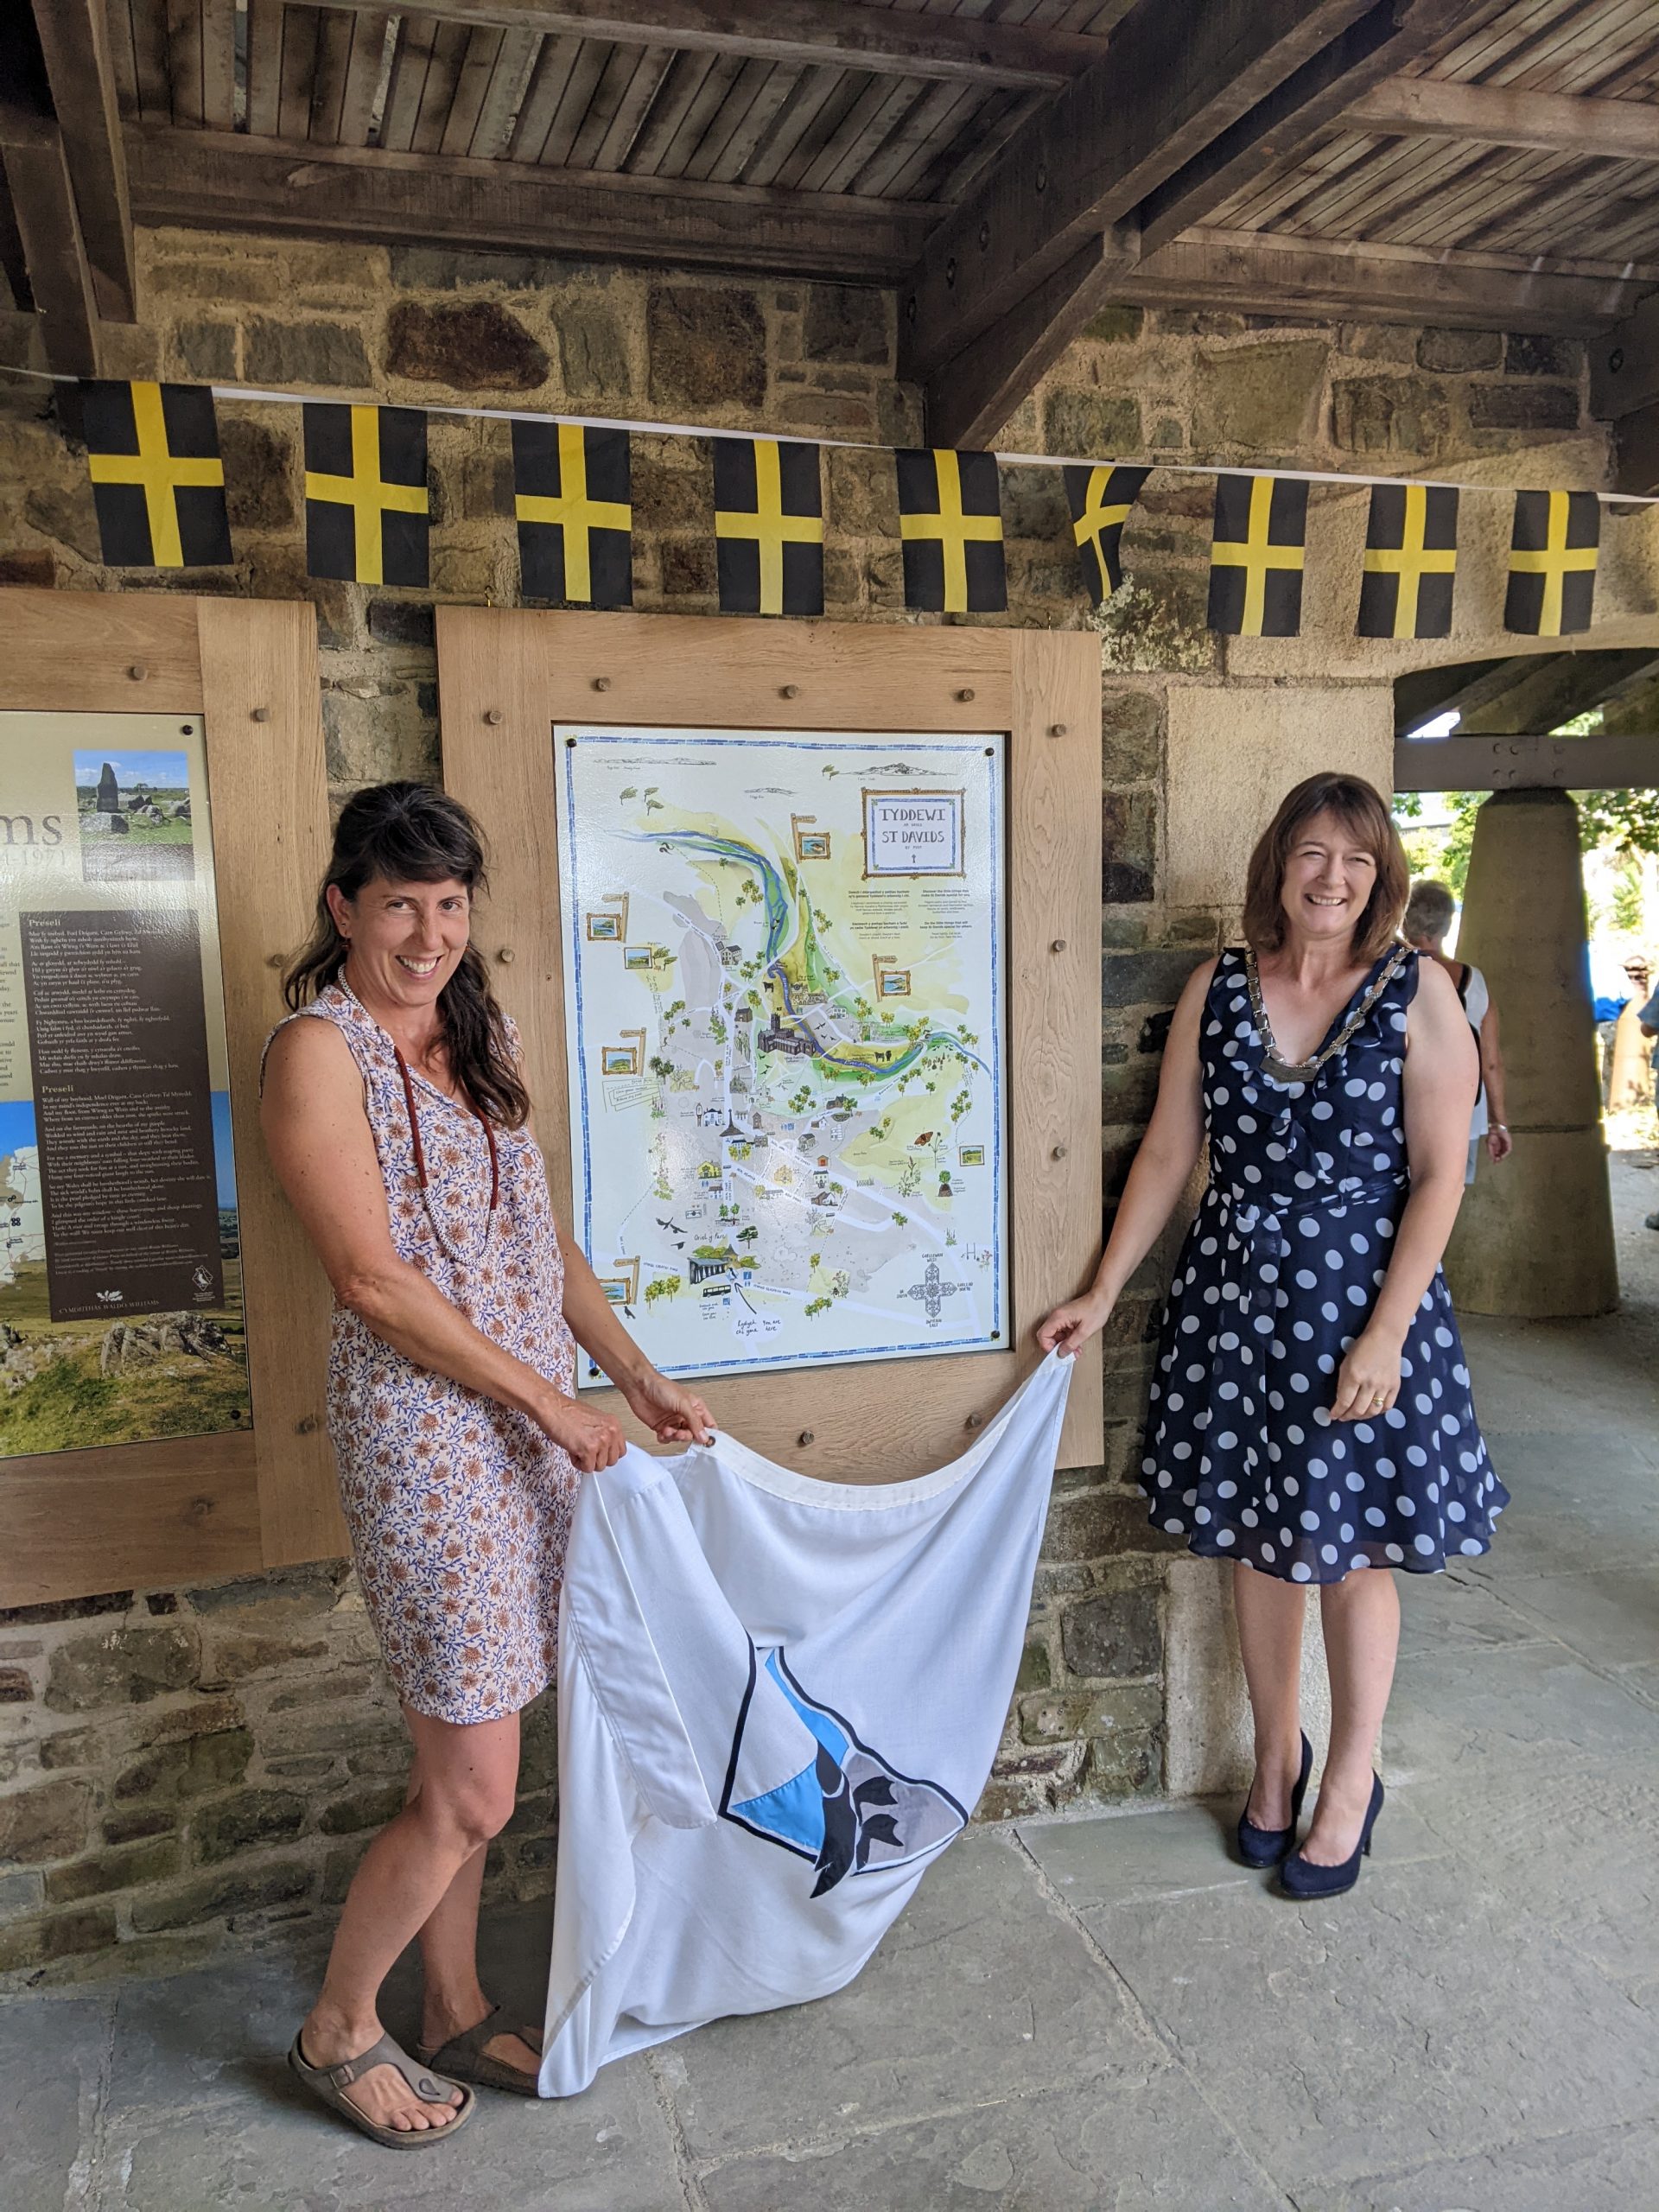 Artist Hannah Rounding and Deputy Mayor of St Davids Cllr Emma Evans unveiling a new map of St Davids outside Oriel y Parc Gallery and Visitor Centre